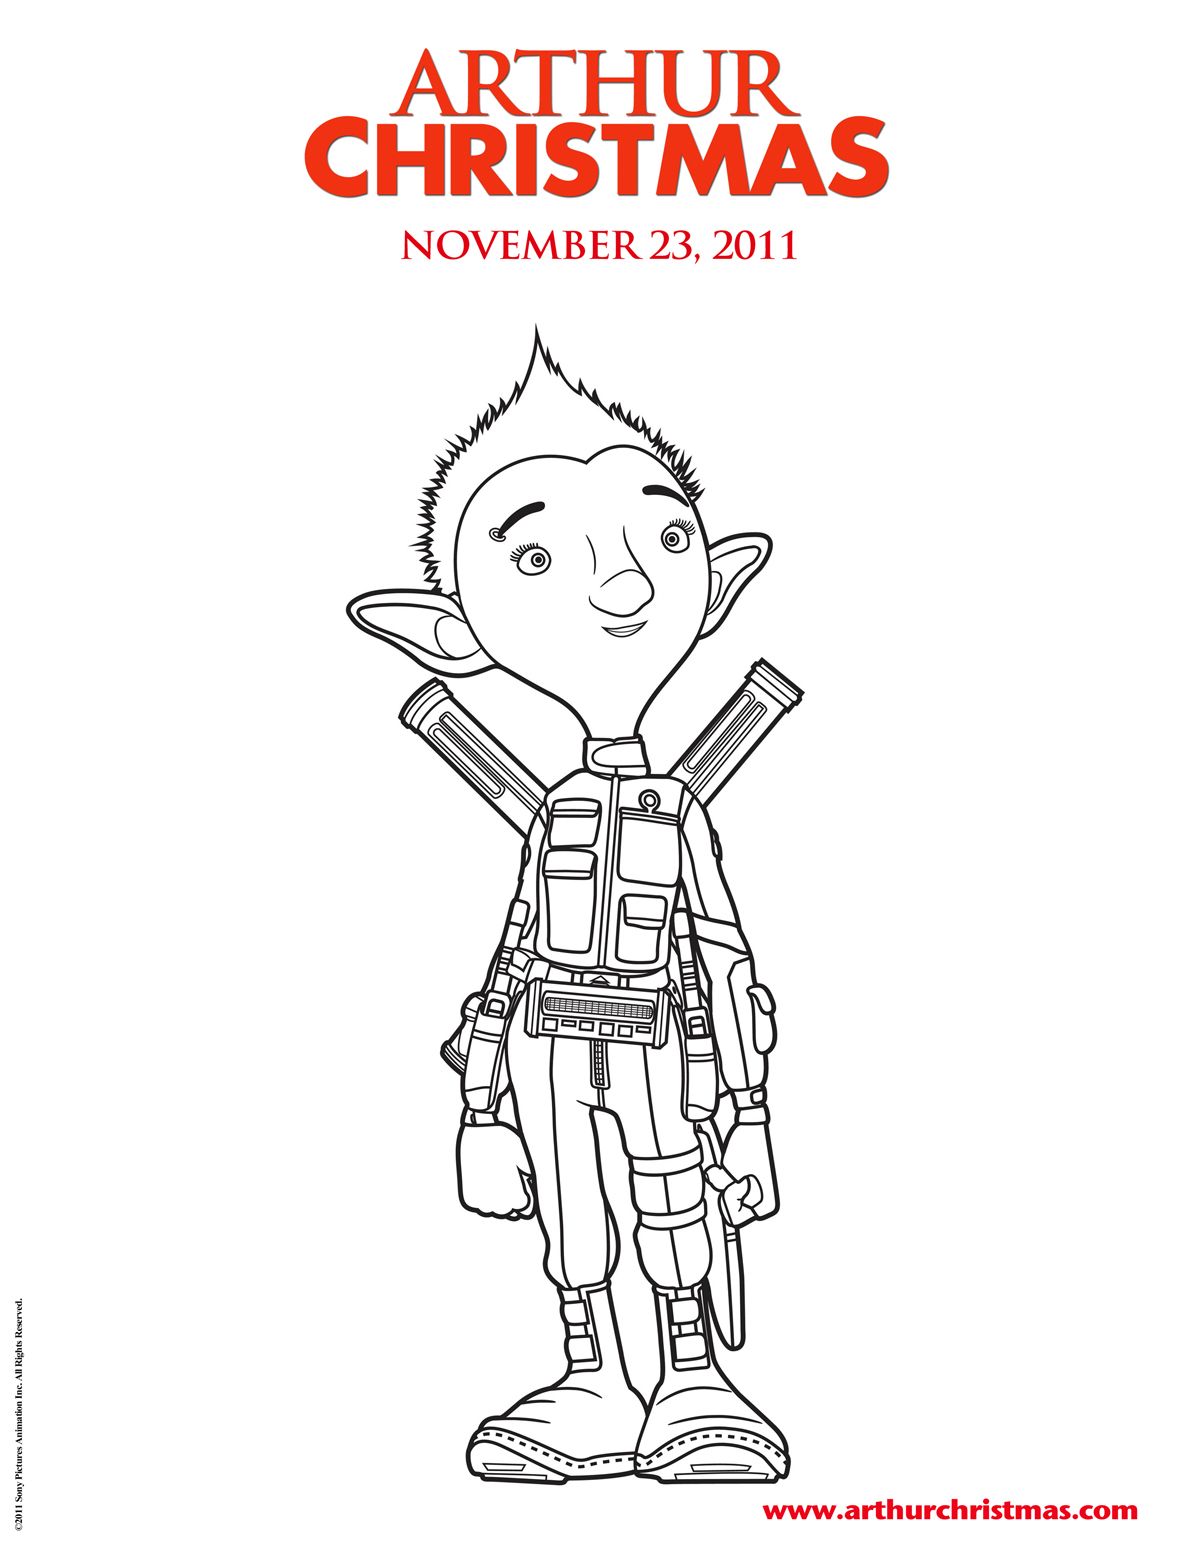 Coloring Pages Arthur Christmas   Cooloring.com   Coloring Home